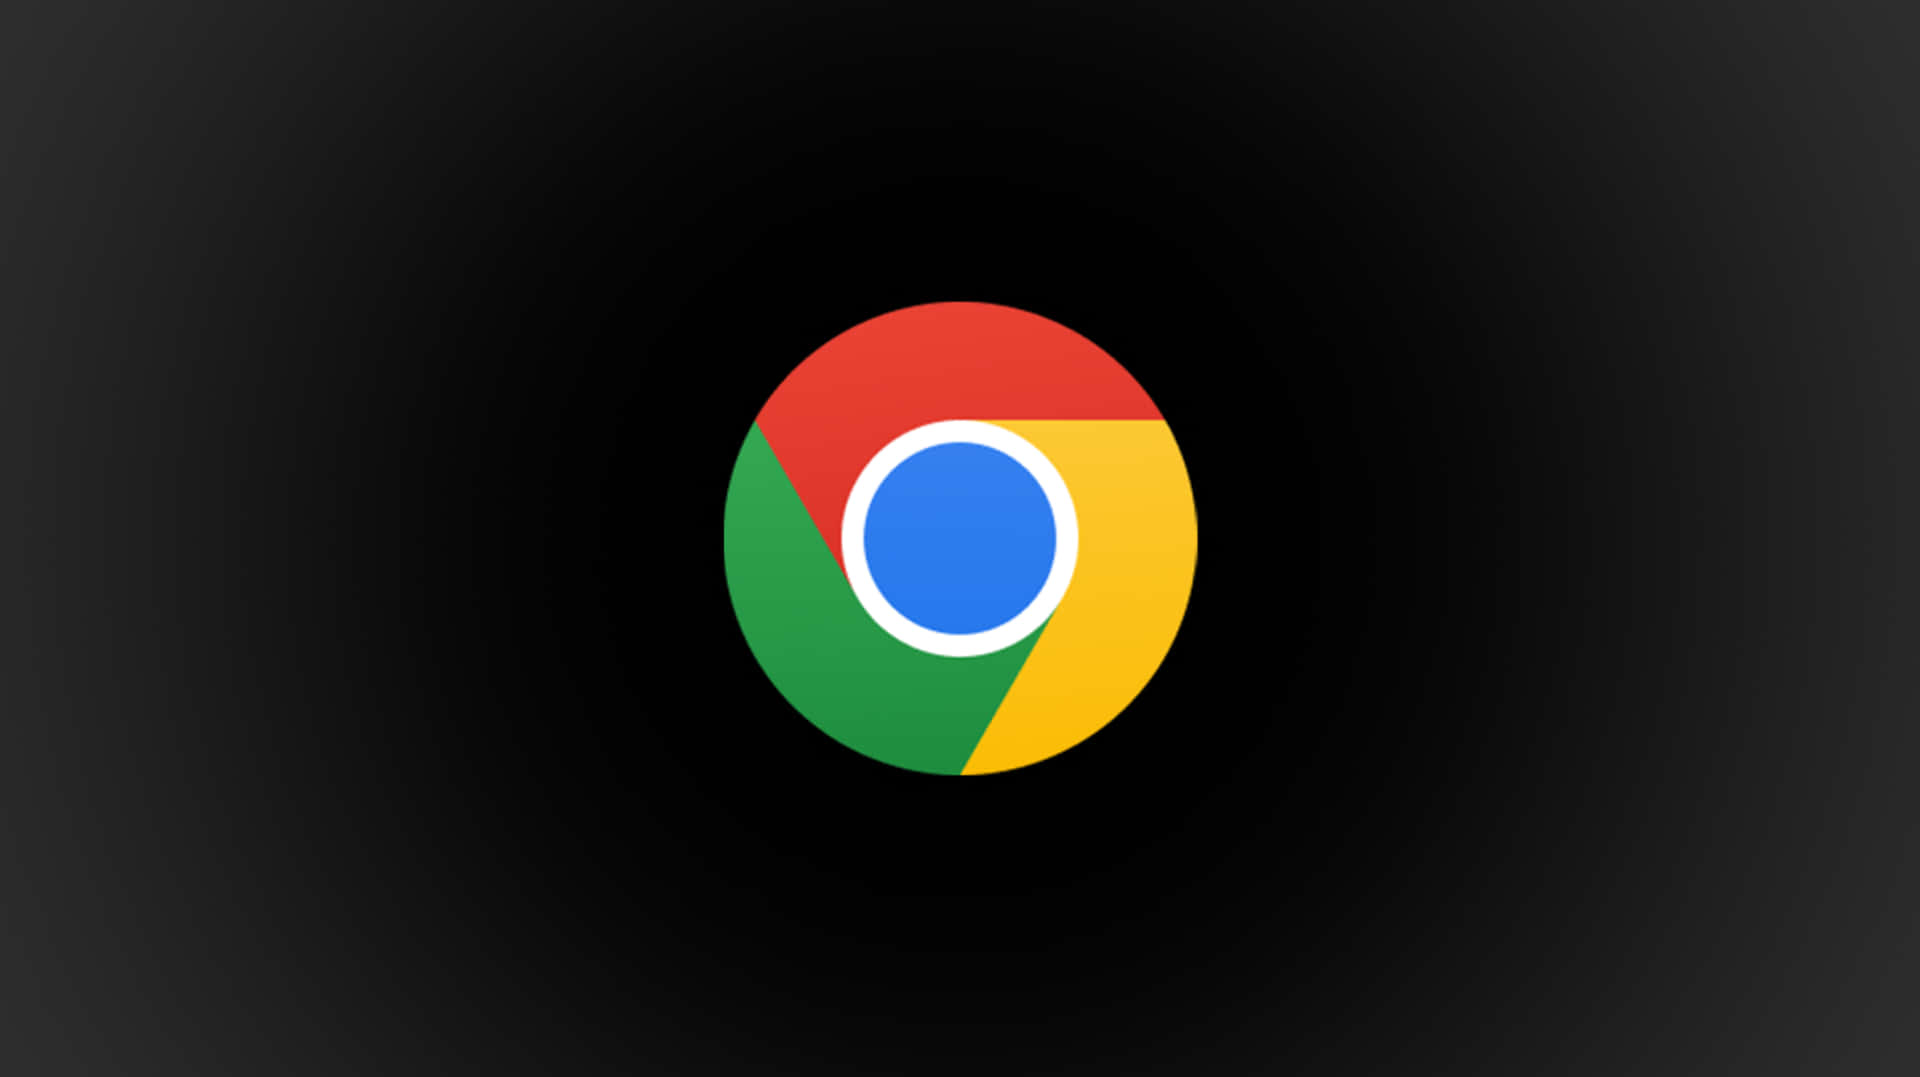 Chrome, Your Web Browser of Choice